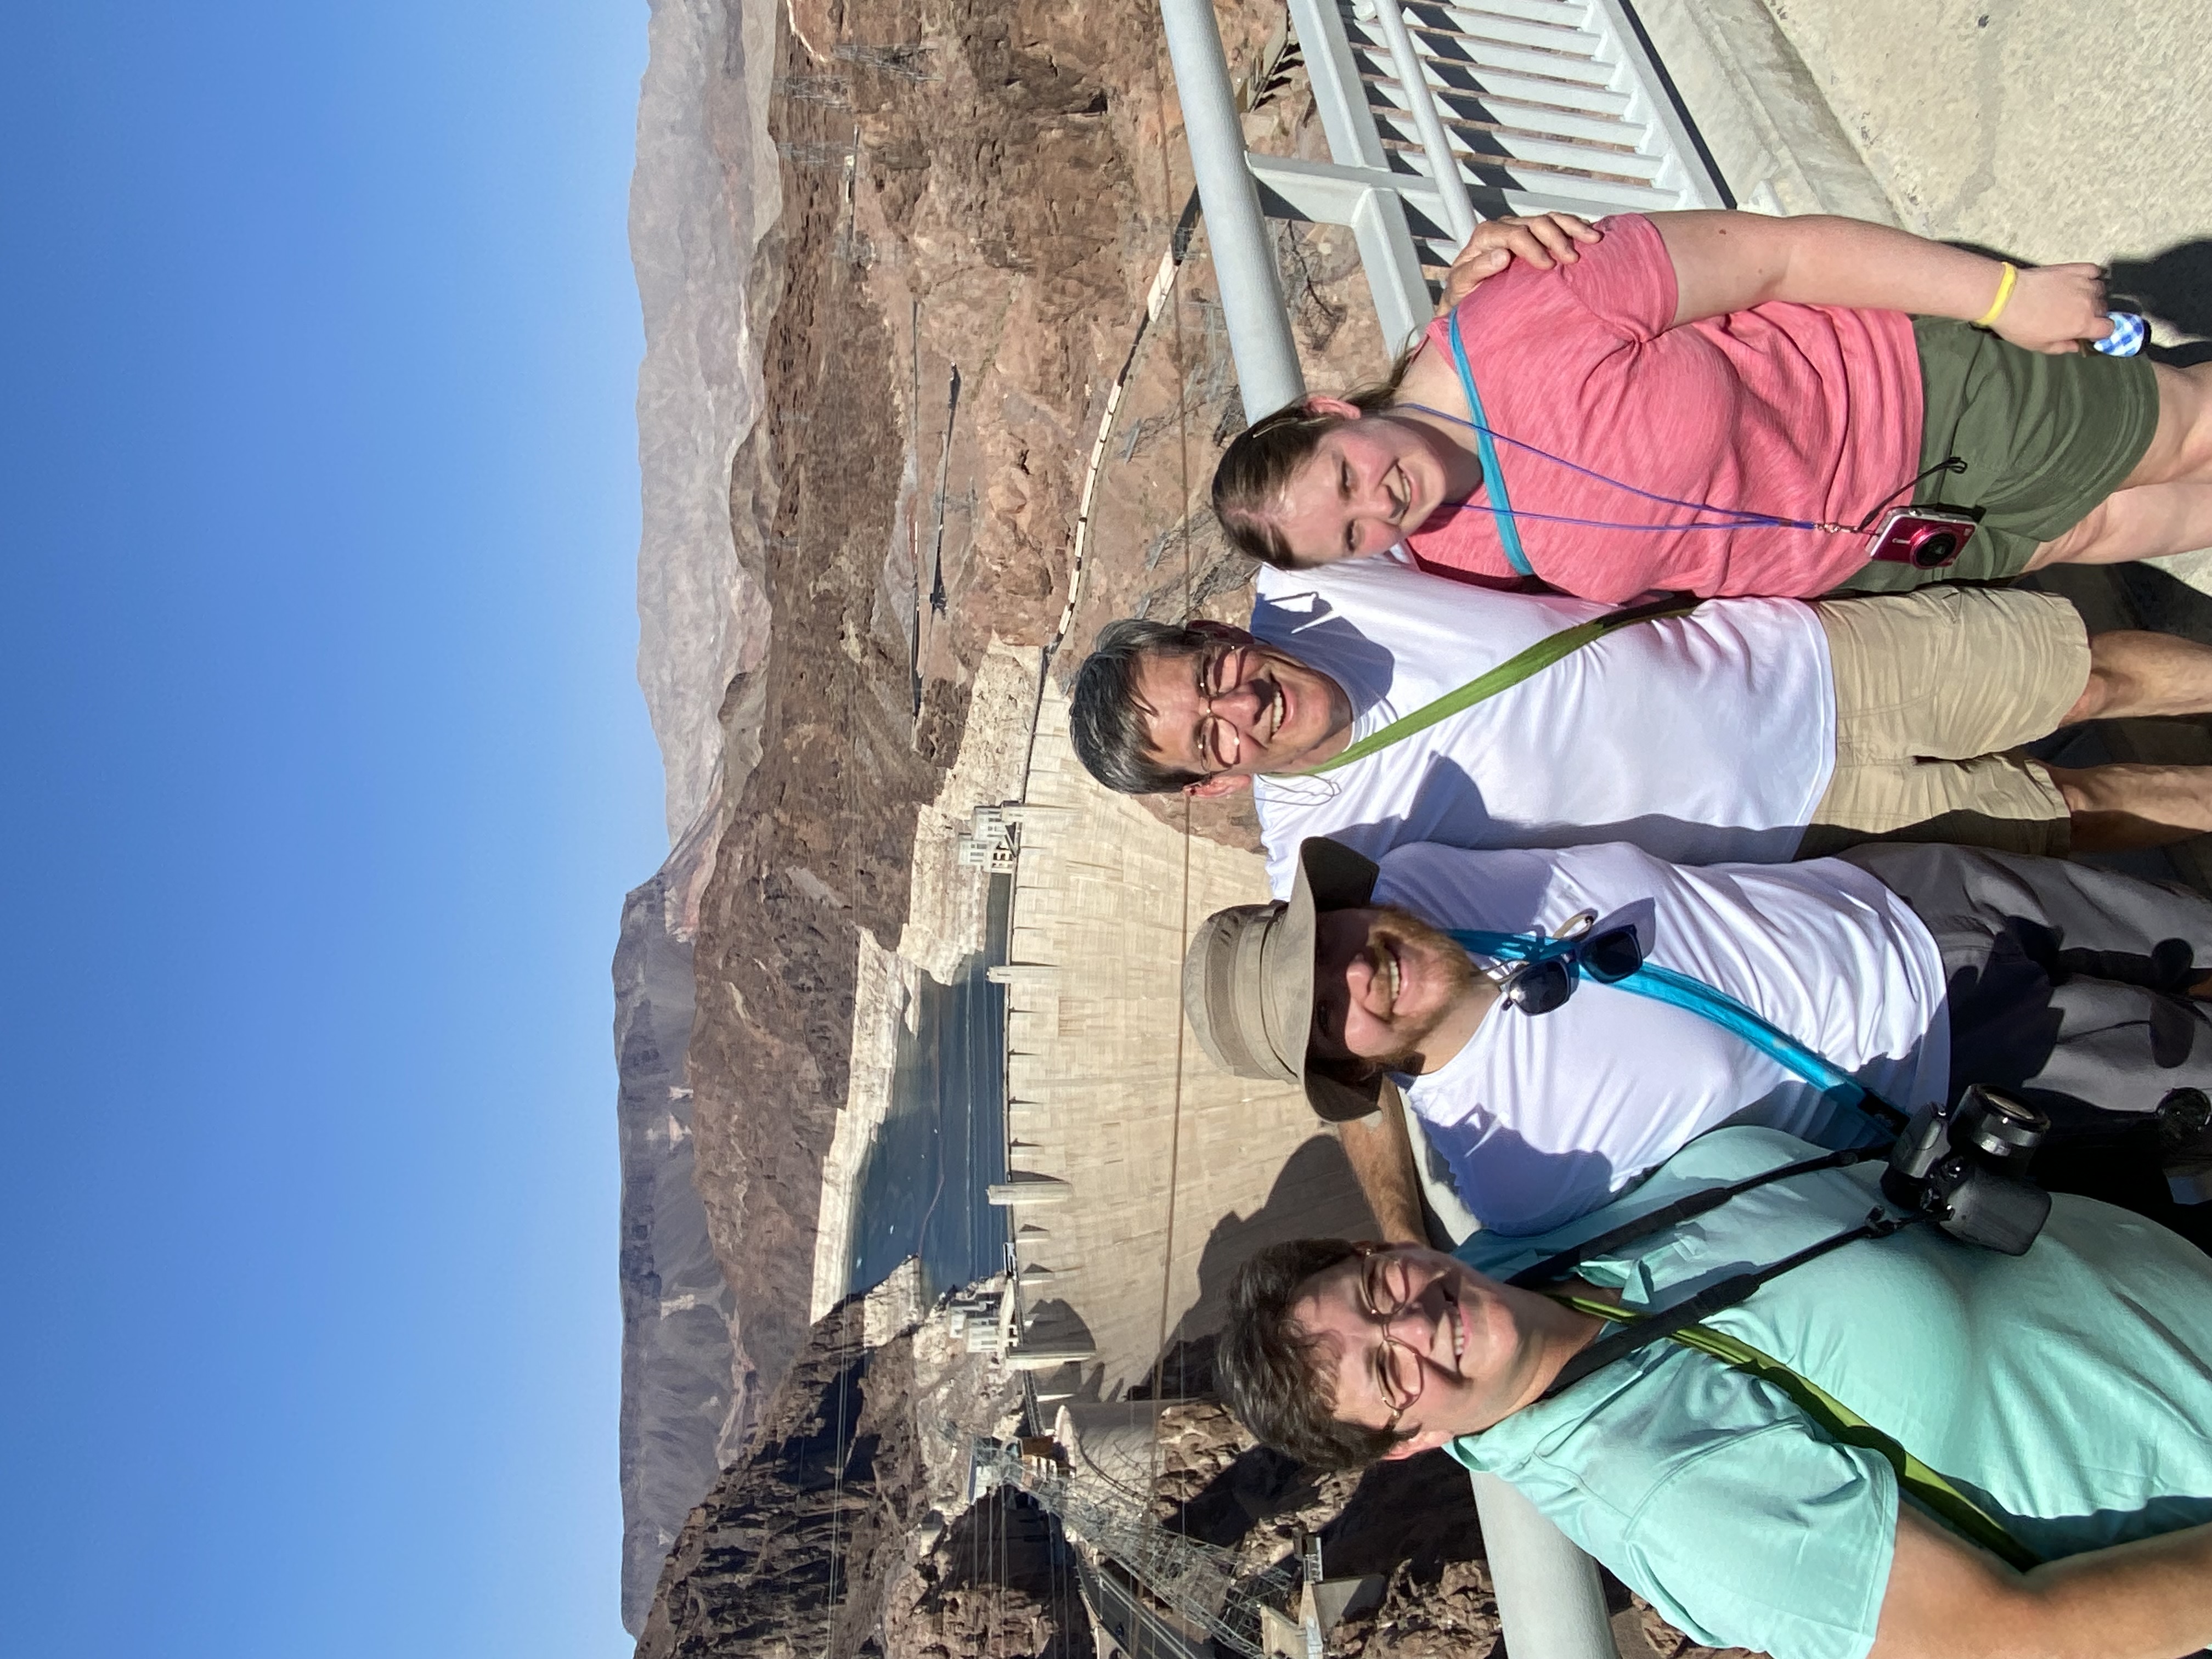 A very windy day at the Hoover Dam.